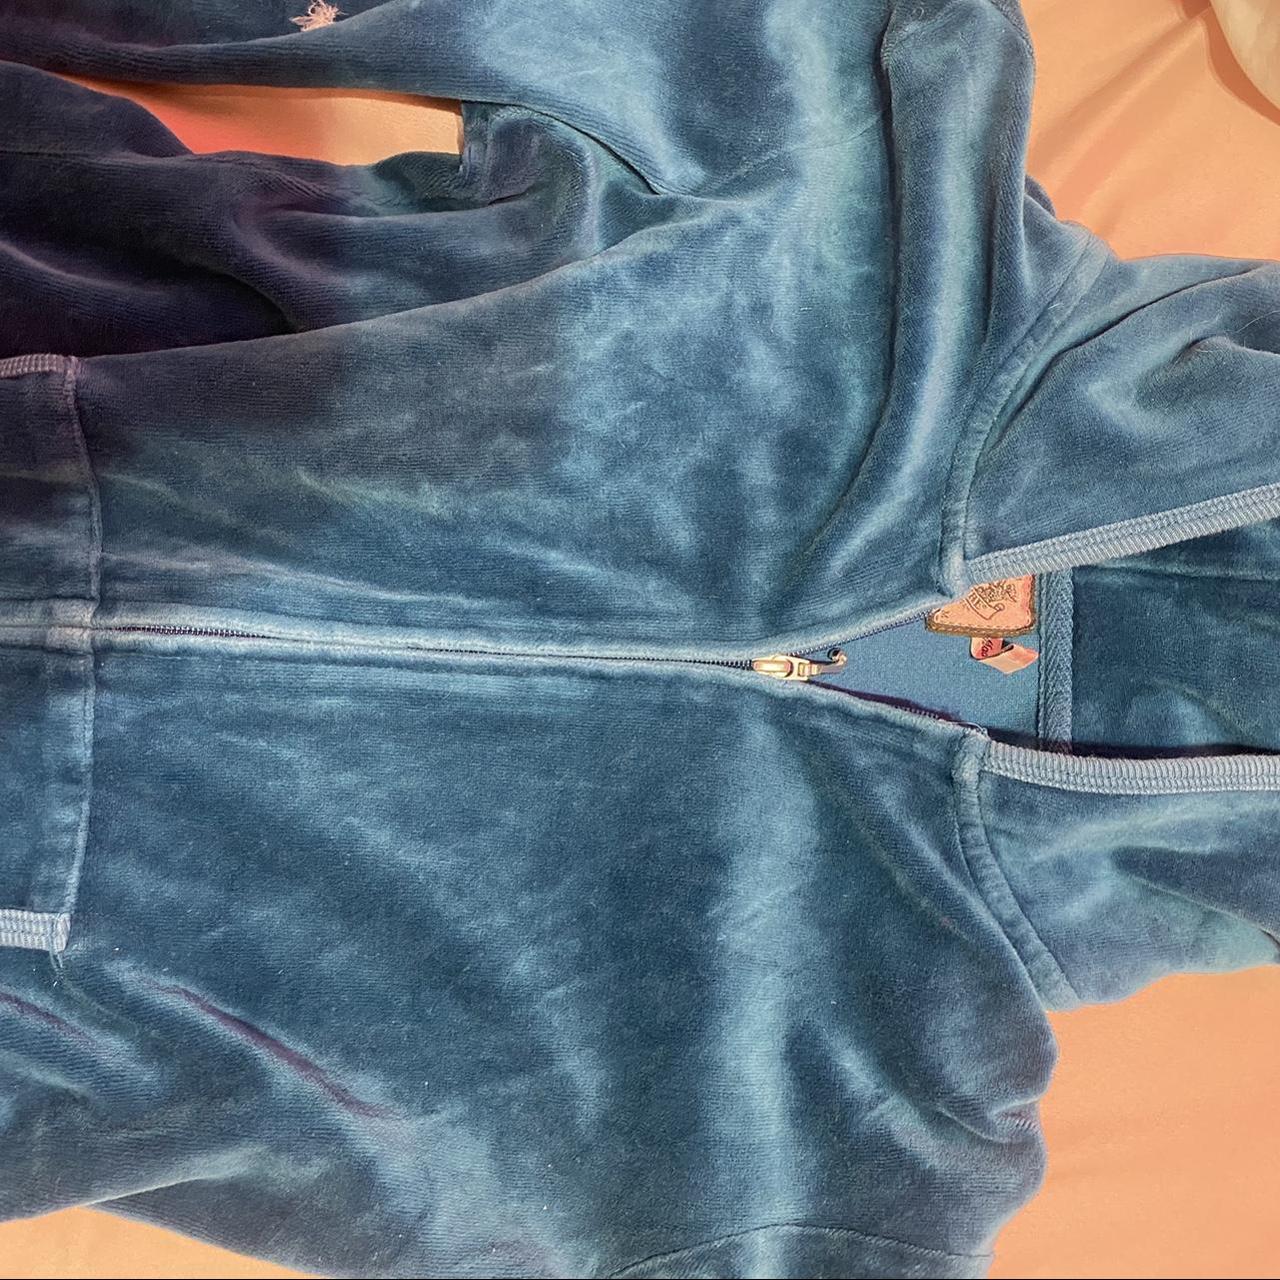 Juicy Couture Women's Blue and Pink Sweatshirt (4)